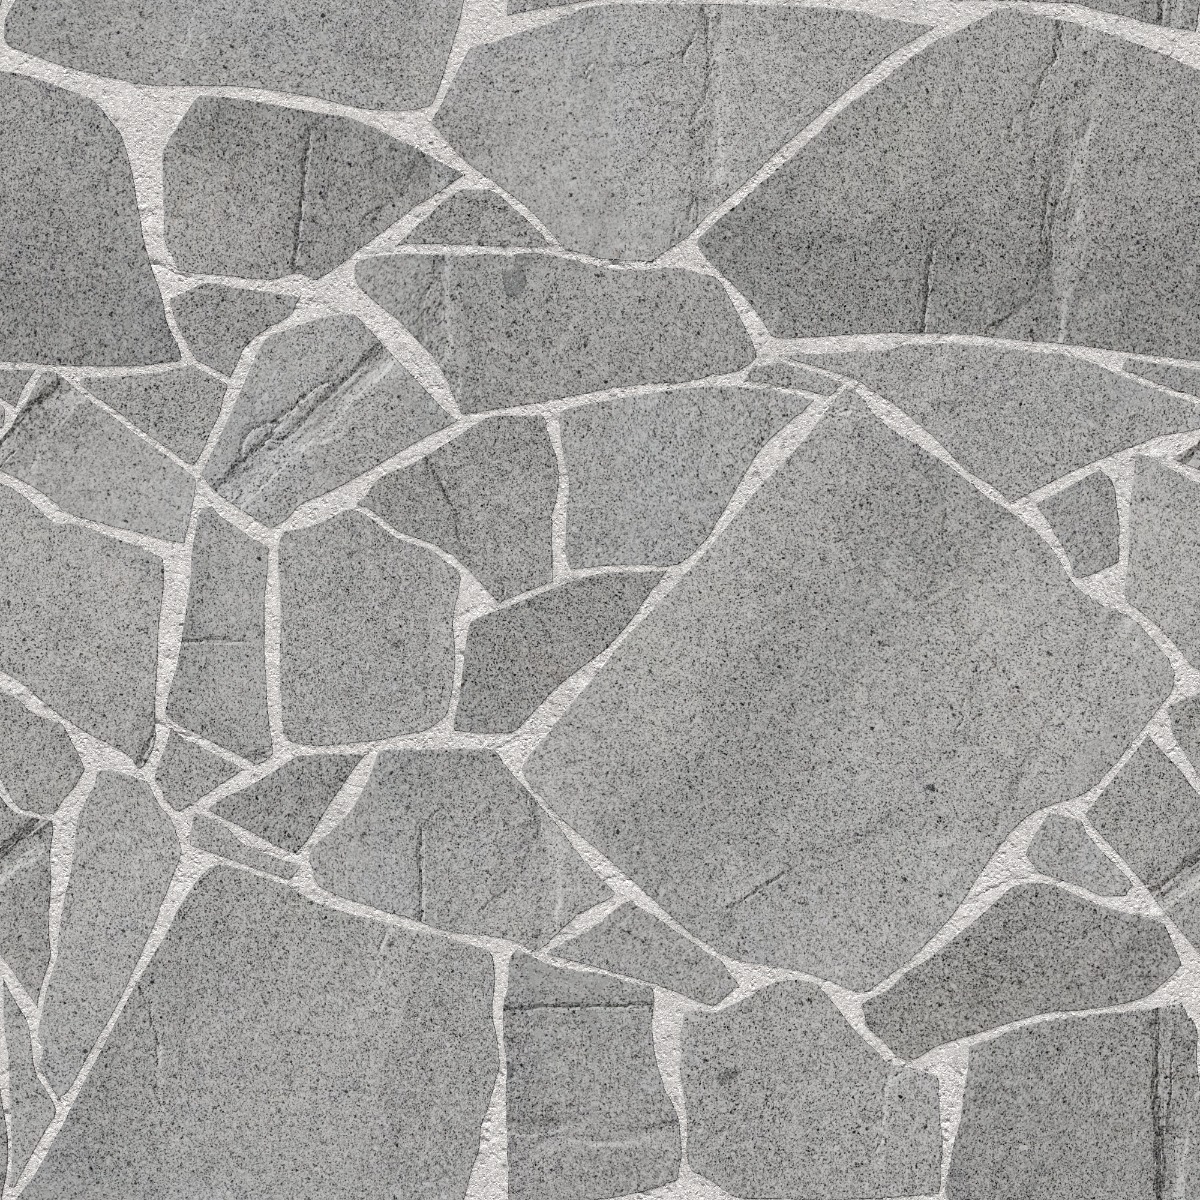 A seamless stone texture with granite blocks arranged in a Crazy Paving pattern